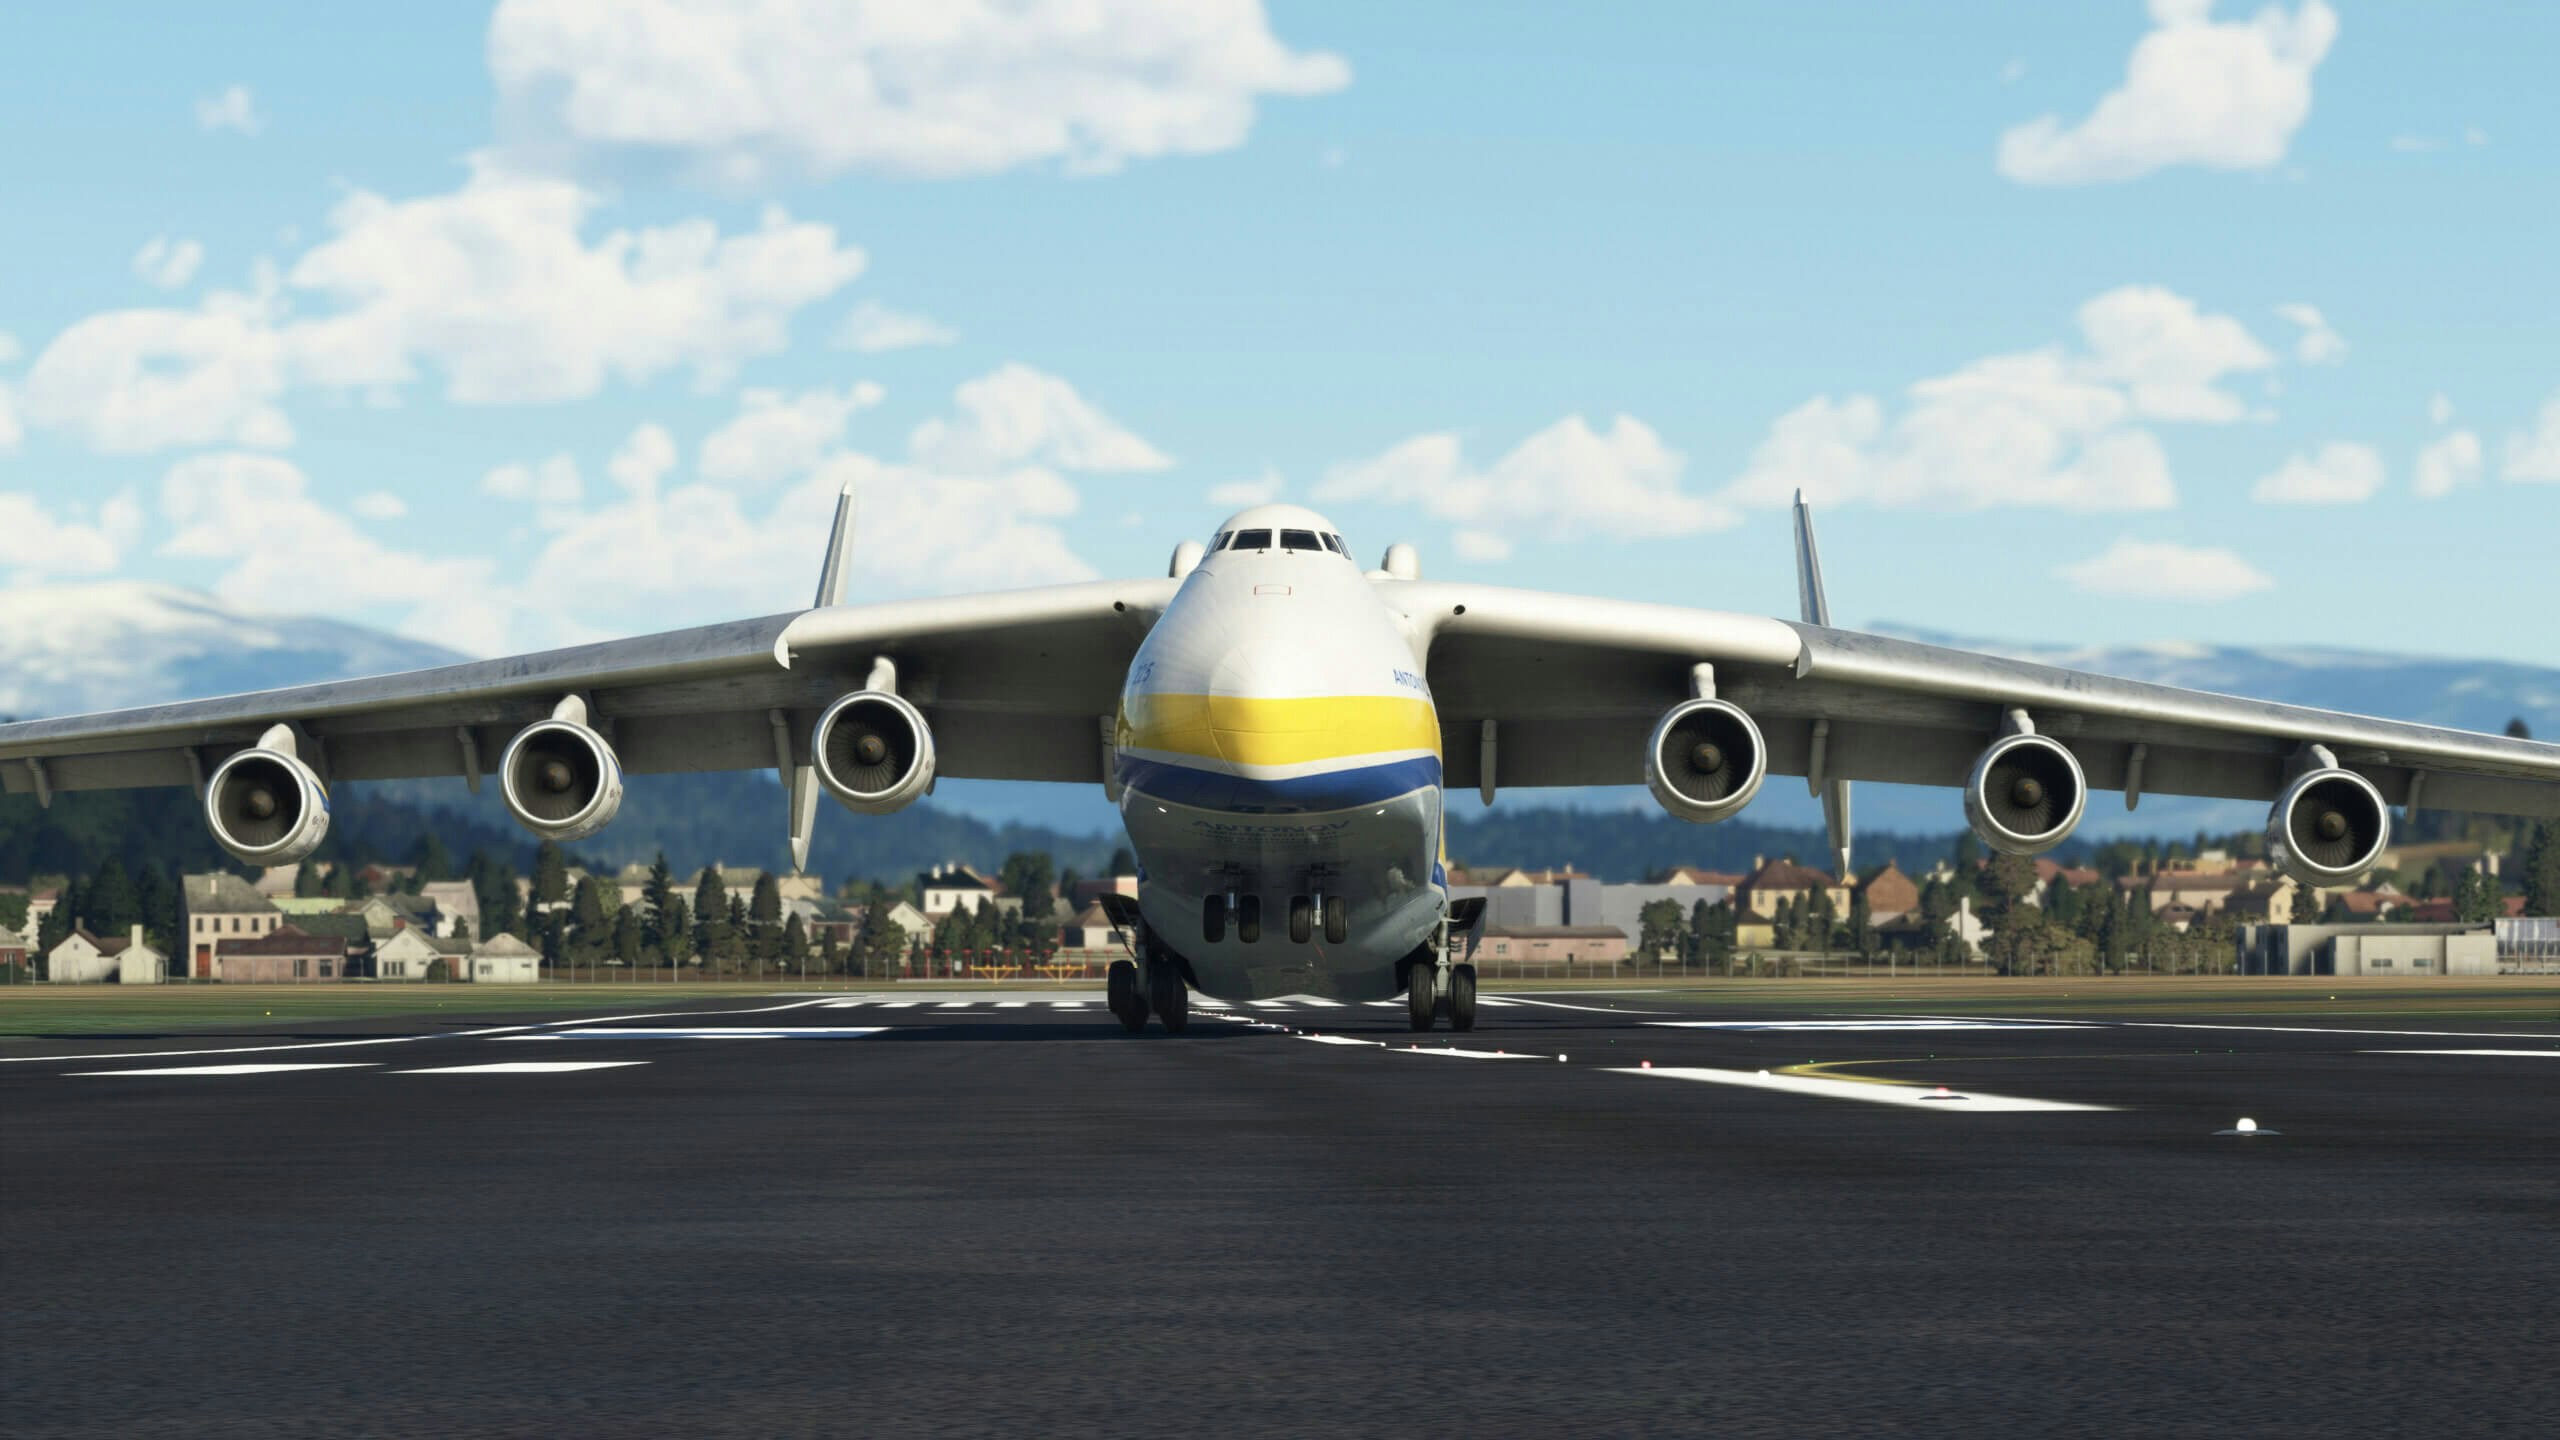 Interview: Microsoft on the Antonov An-225 Mriya Feat. iniBuilds and Real-World An-225 Pilot